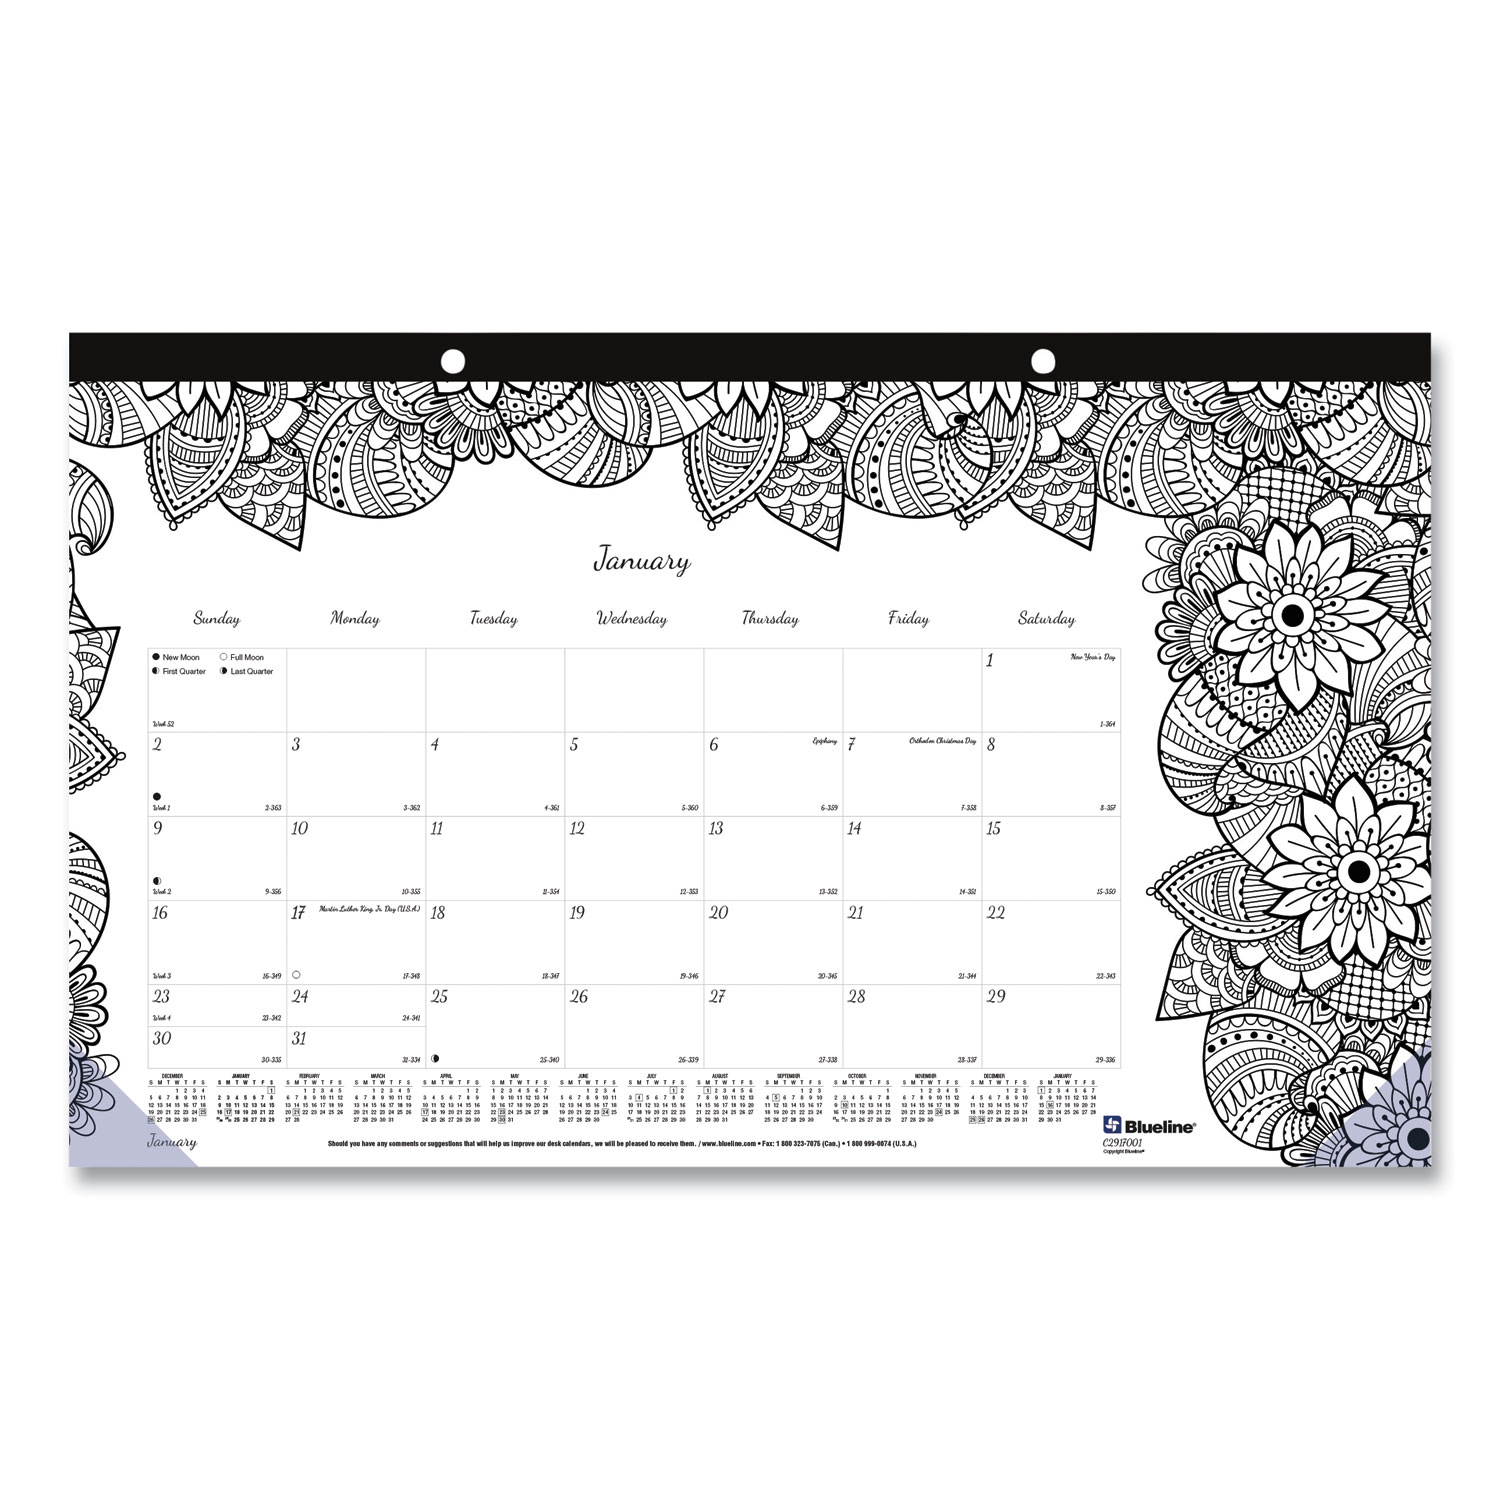 Imprinted Monthly Calendar Doodle Pads with Grommet and Greeting Page